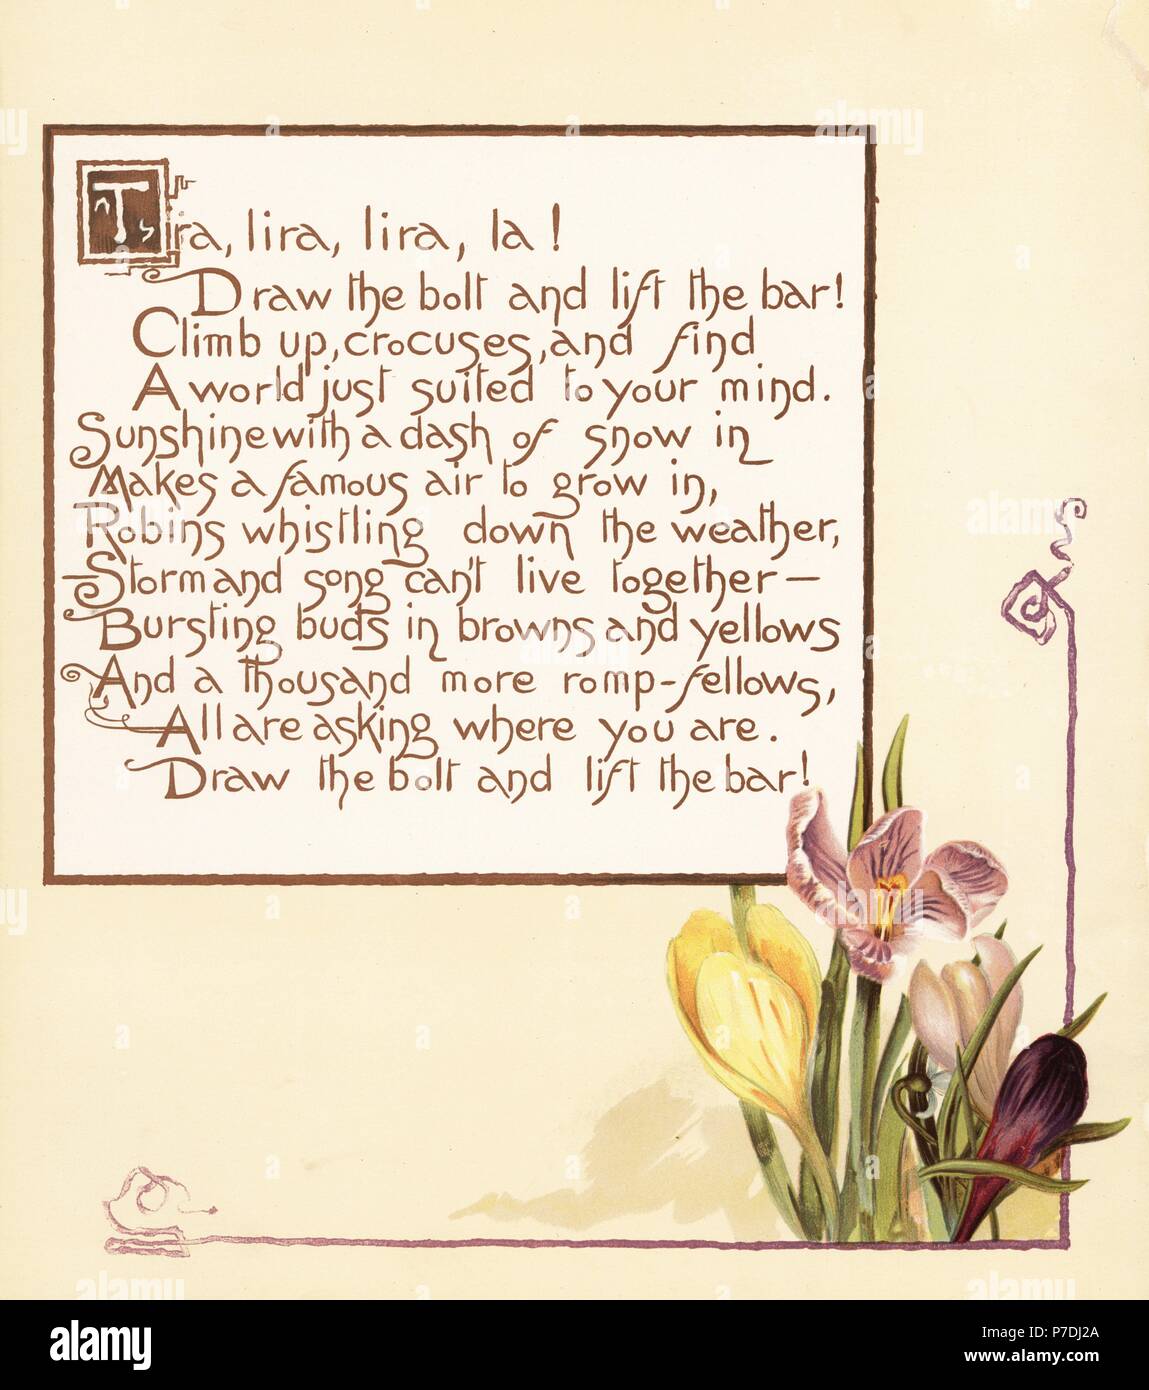 Crocus flowers, Crocus sativus, and calligraphic poem. Chromolithograph by Louis Prang from Alice Ward Bailey's Flower Fancies, Boston, 1889. Illustrated by Lucy Baily, Eleanor Ecob Morse, Olive Whitney, Ellen Fisher, Fidelia Bridges, C. Ryan and F. Schuyler Mathews. Stock Photo